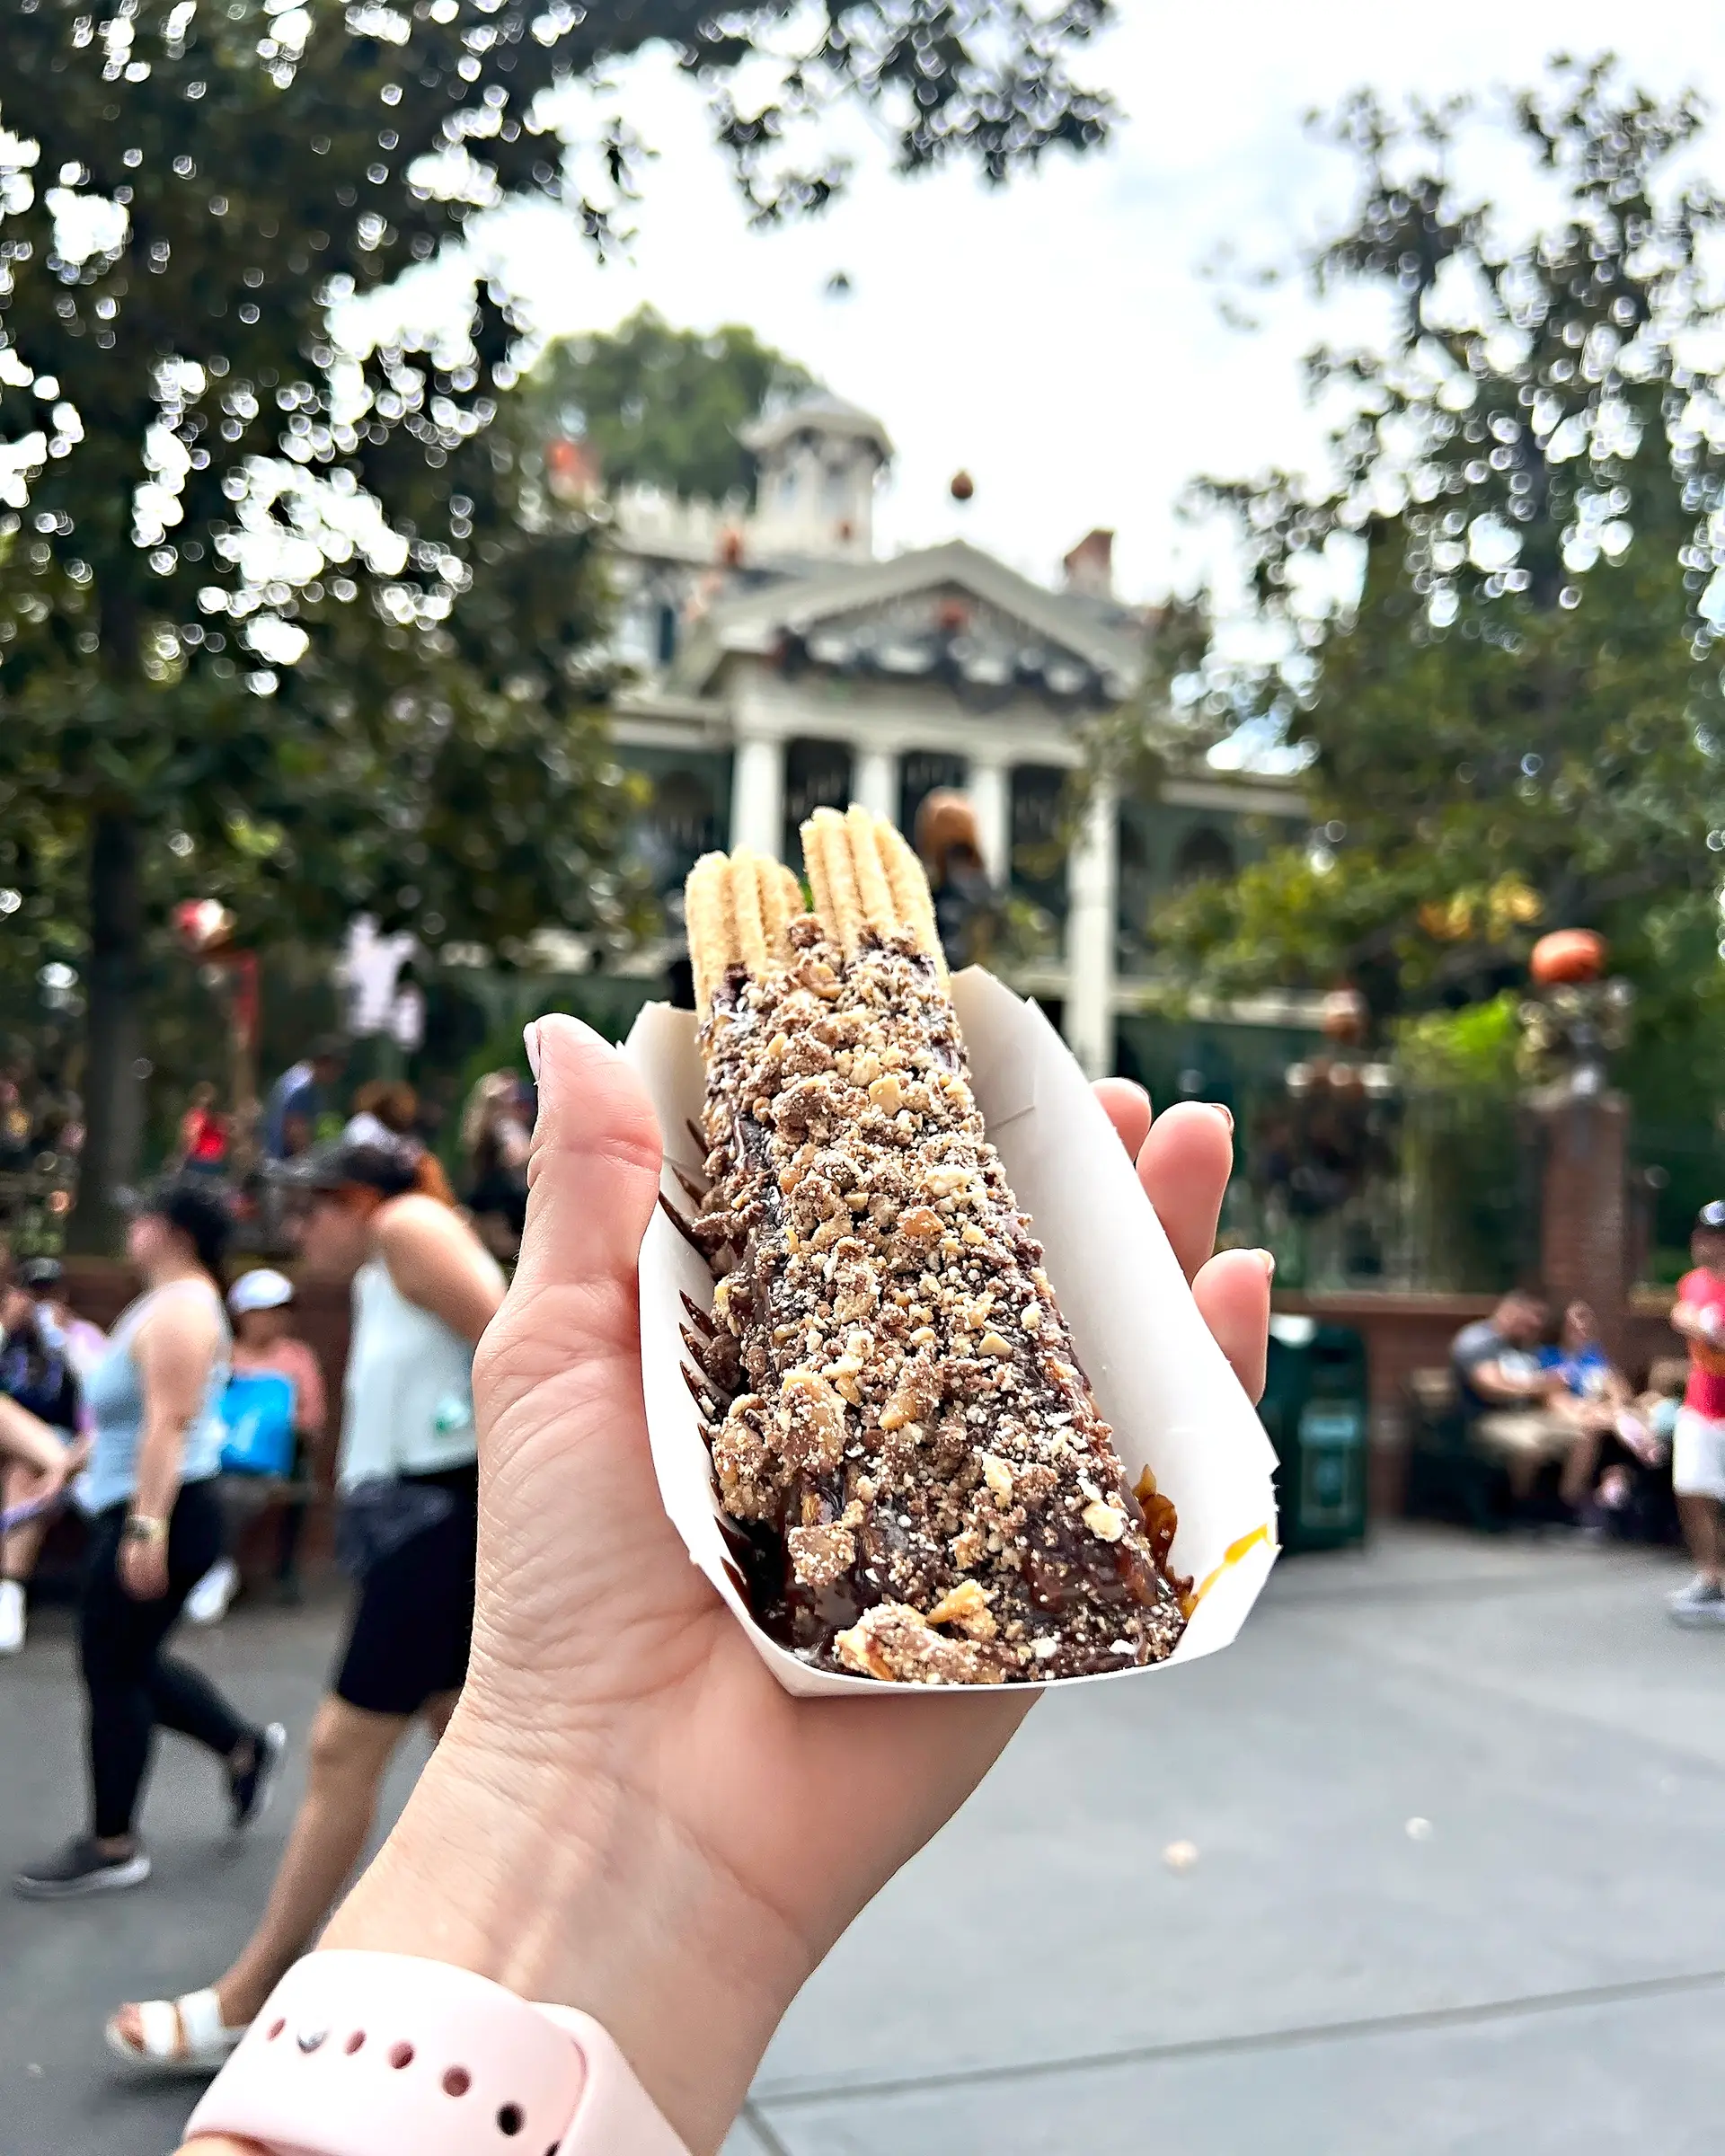 Disneyland Food Budget: How Much you’ll Spend Each Day